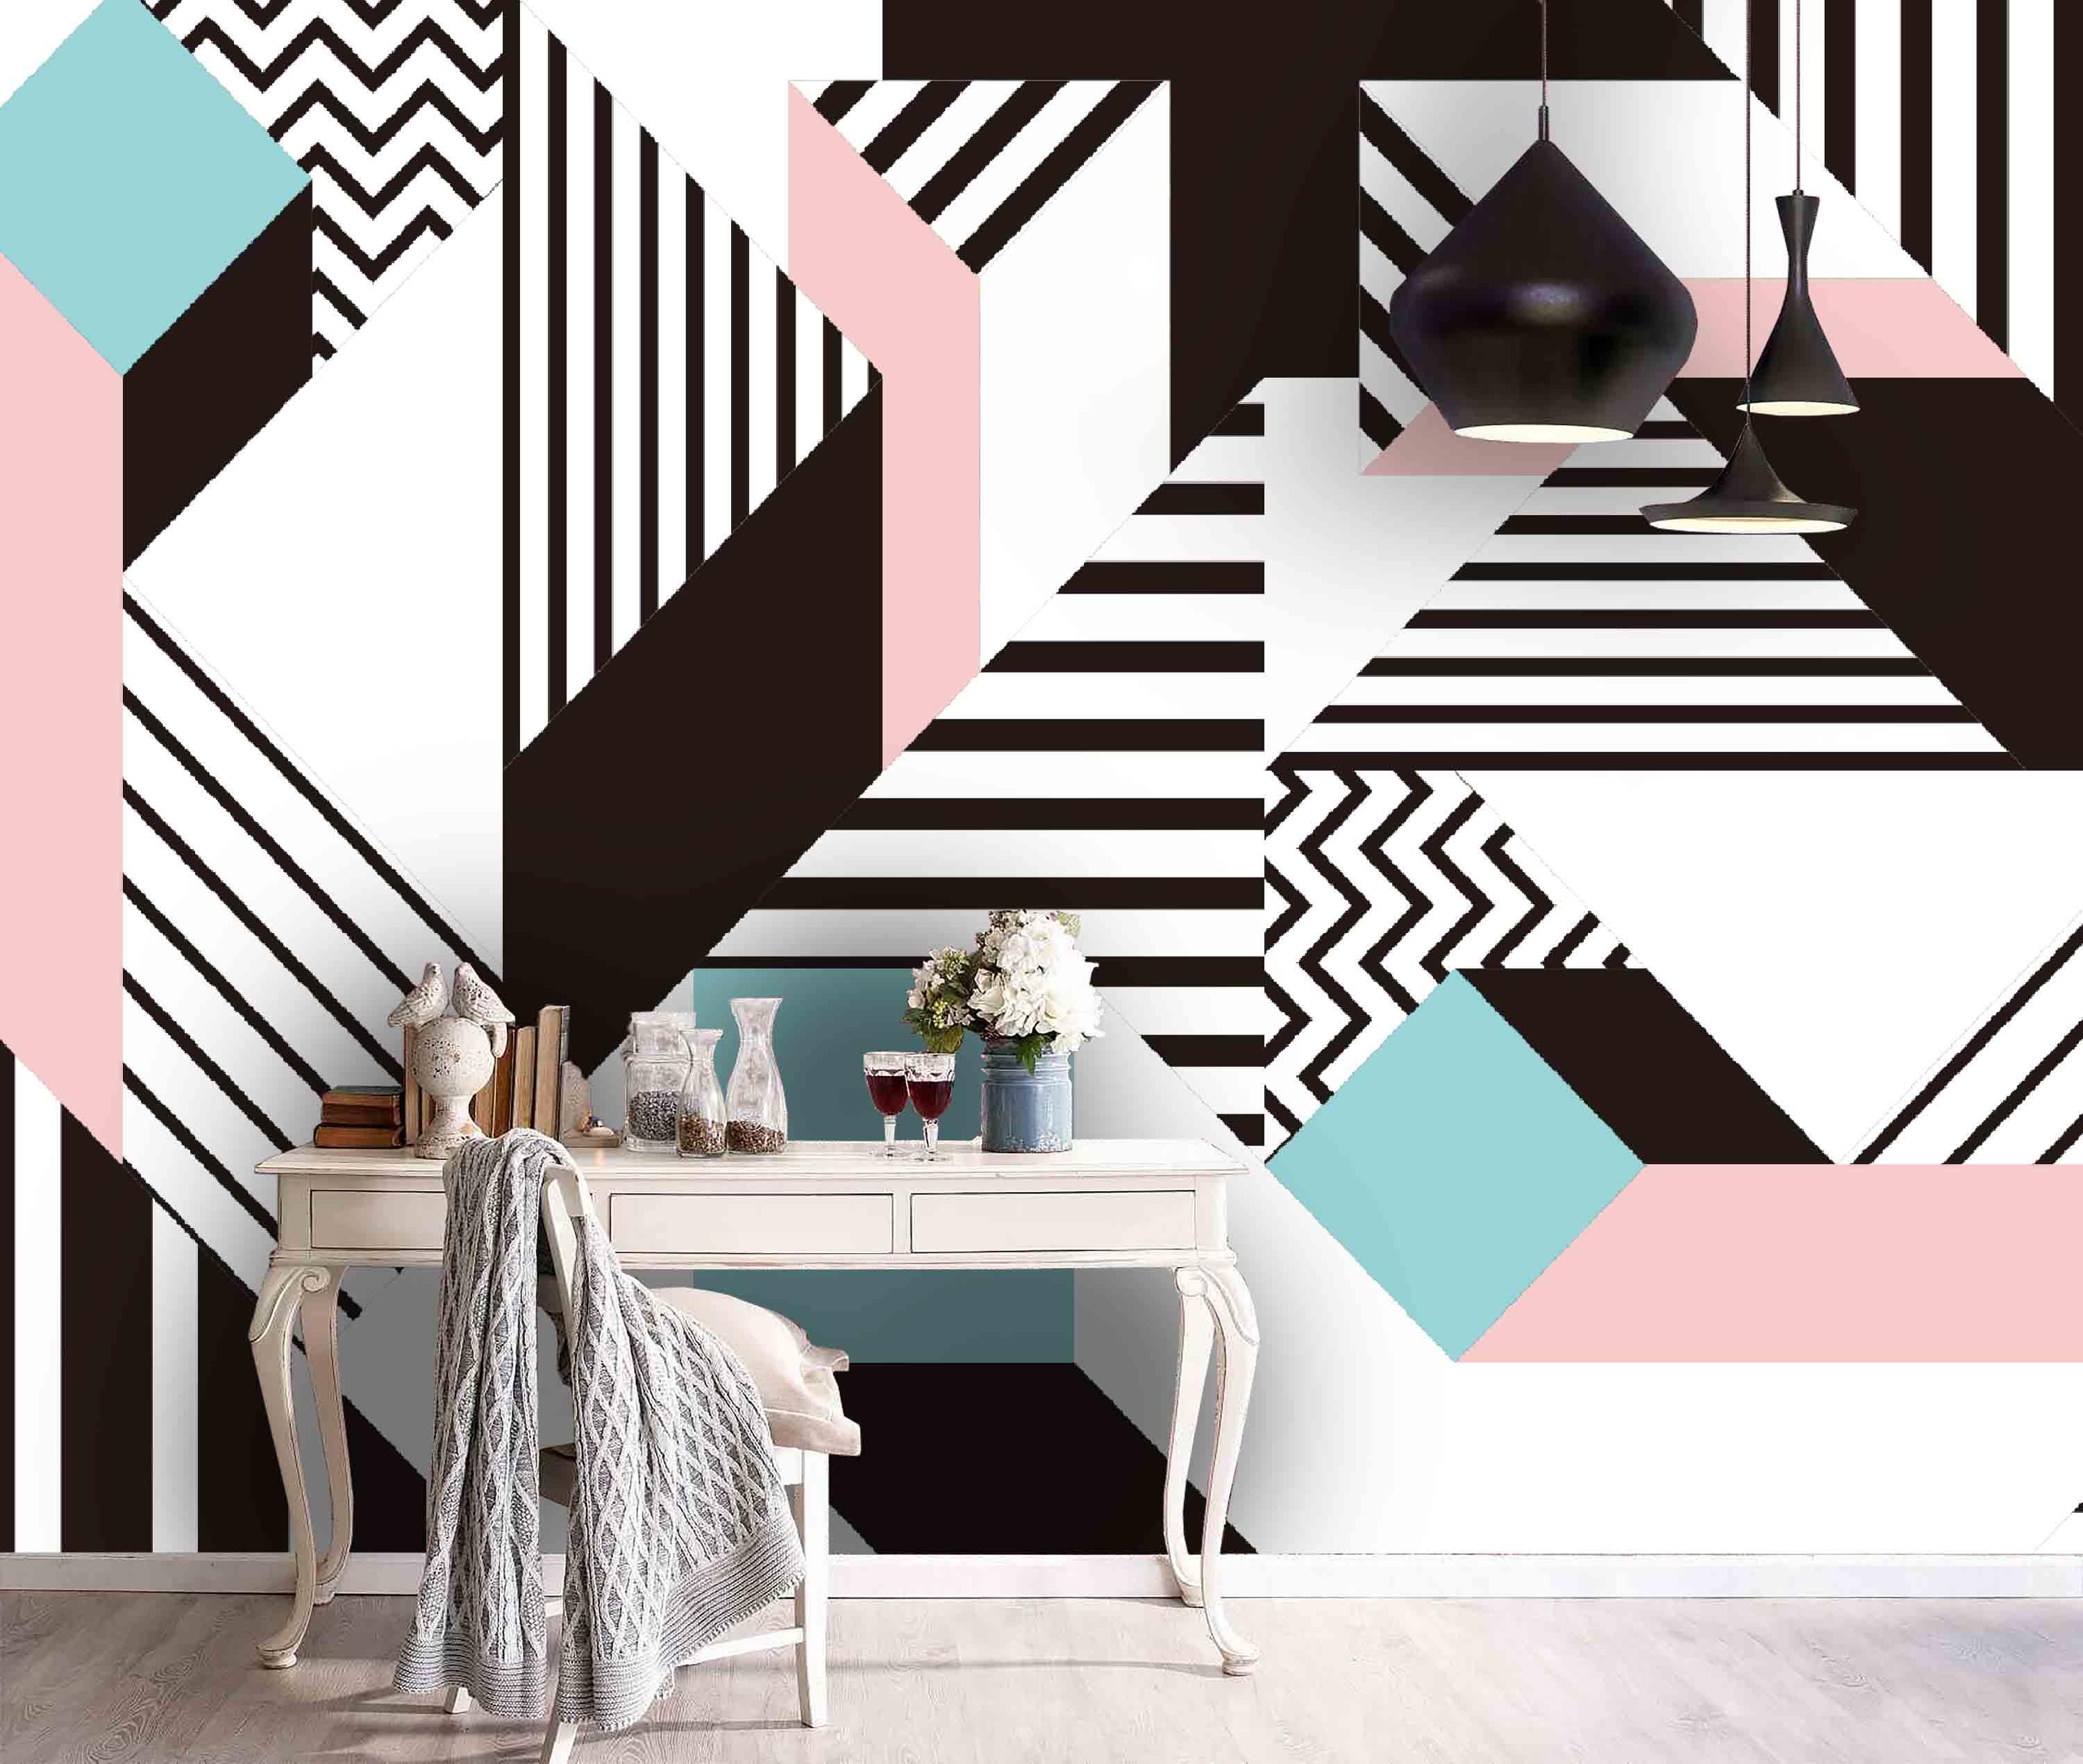 3D Color Triangle Geometry Wall Mural Wallpaper 11- Jess Art Decoration